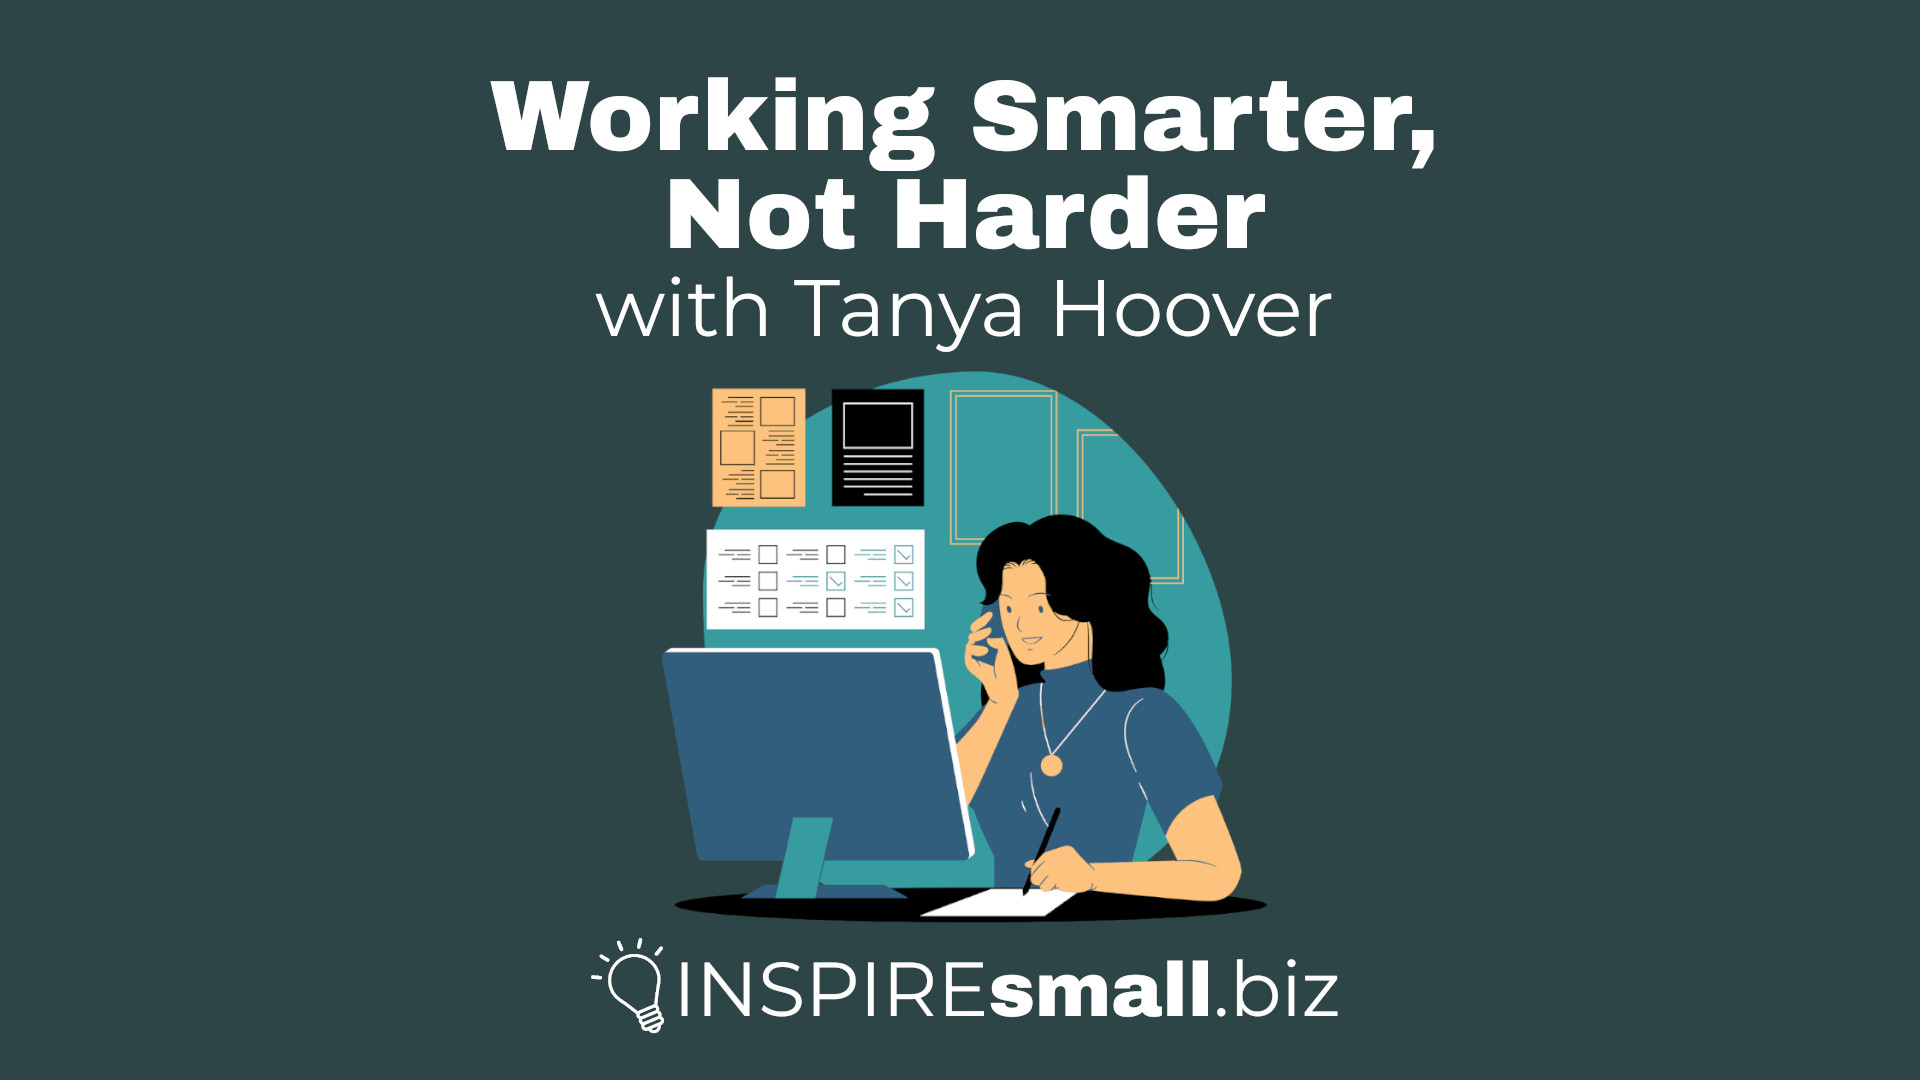 Working Smarter, Not Harder with Tanya Hoover, hosted by INSPIREsmall.biz. Background image of a person looking a computer in front of a dark green background.